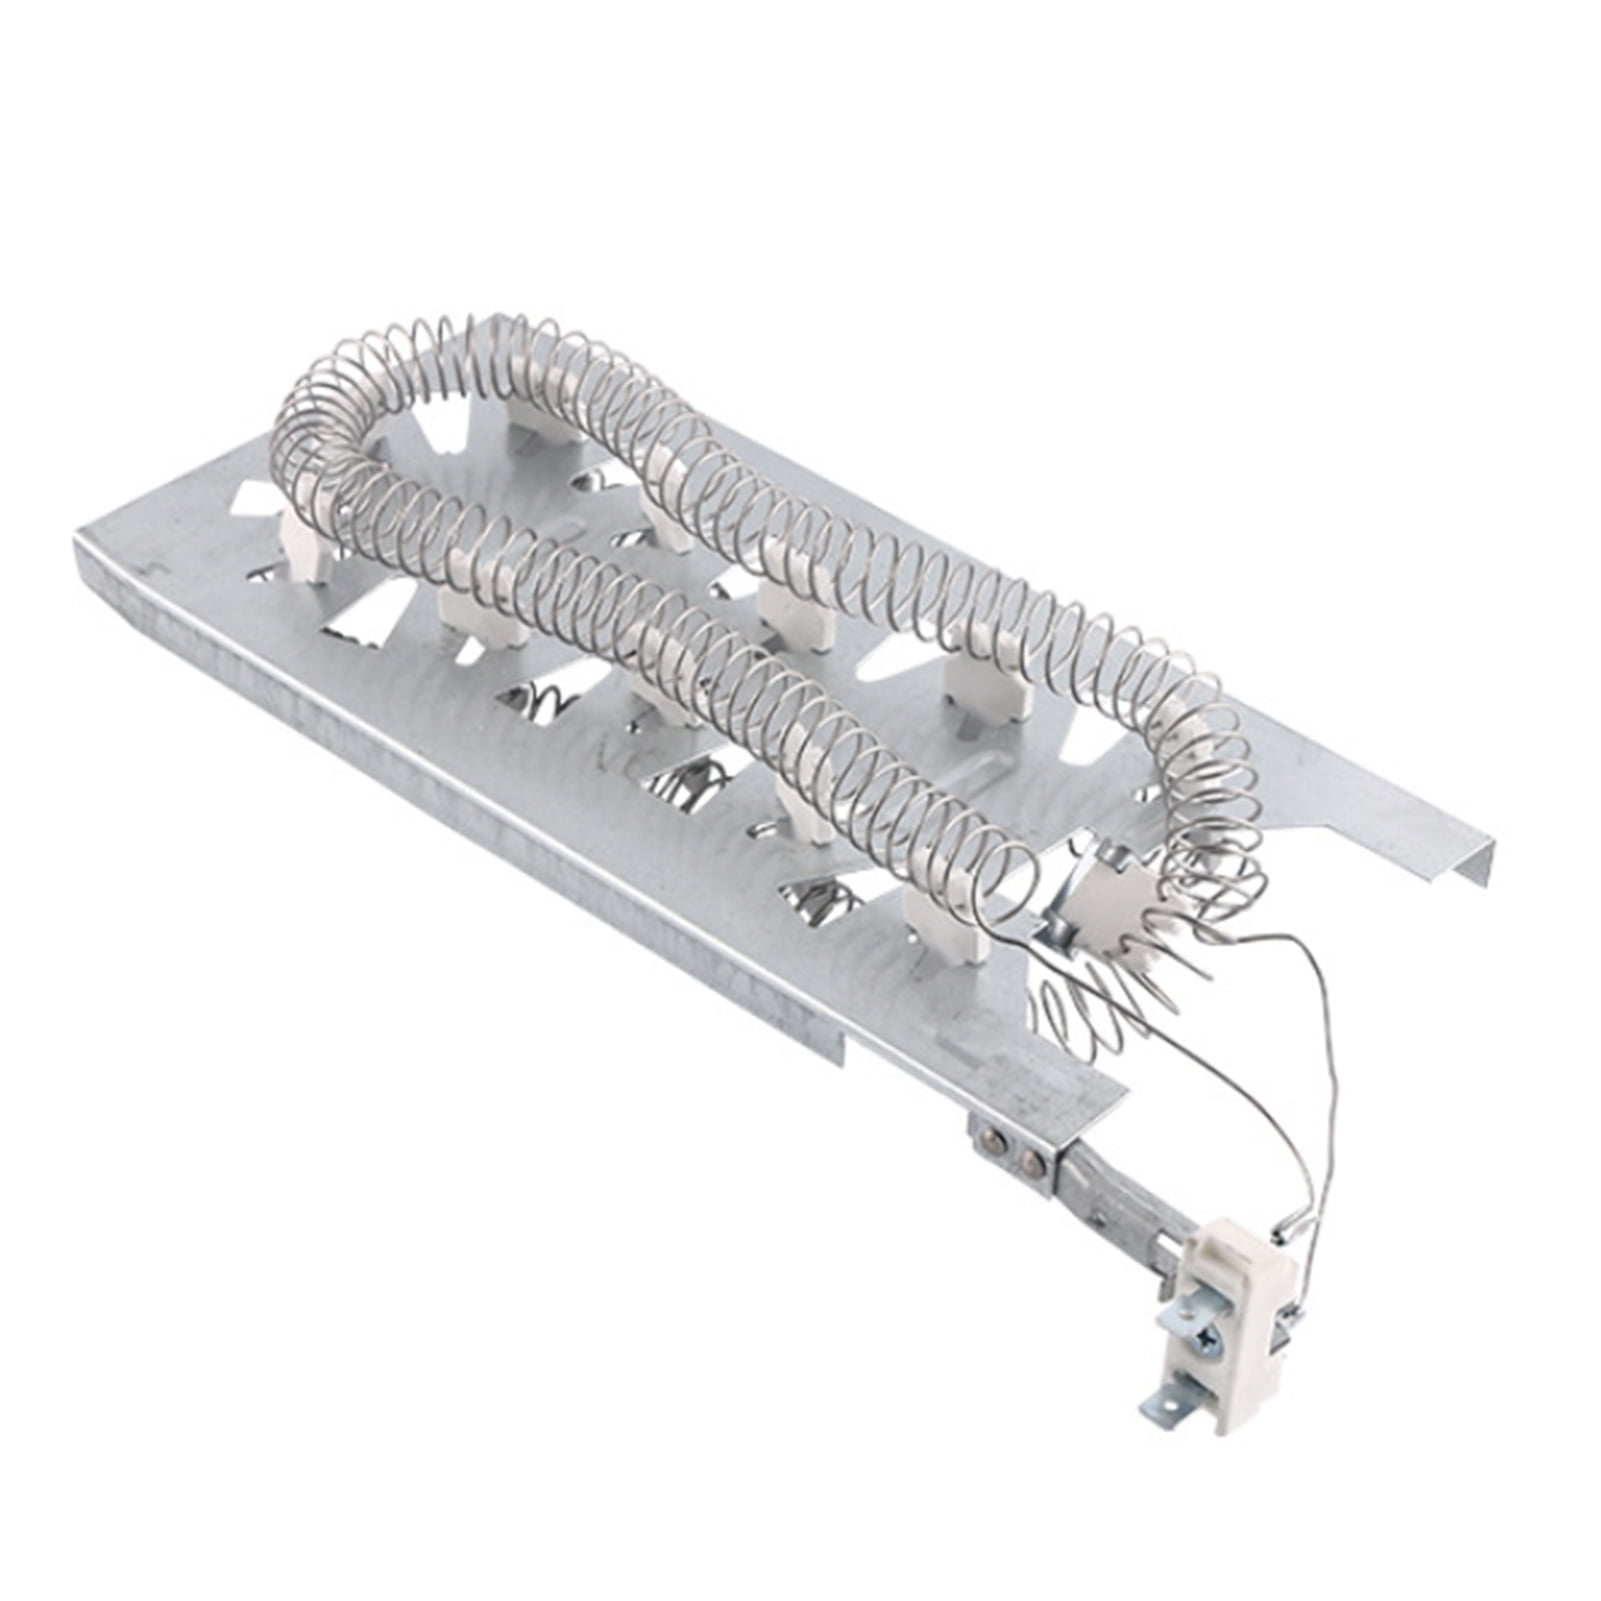 3387747 Dryer Heating Element Replacement Part 